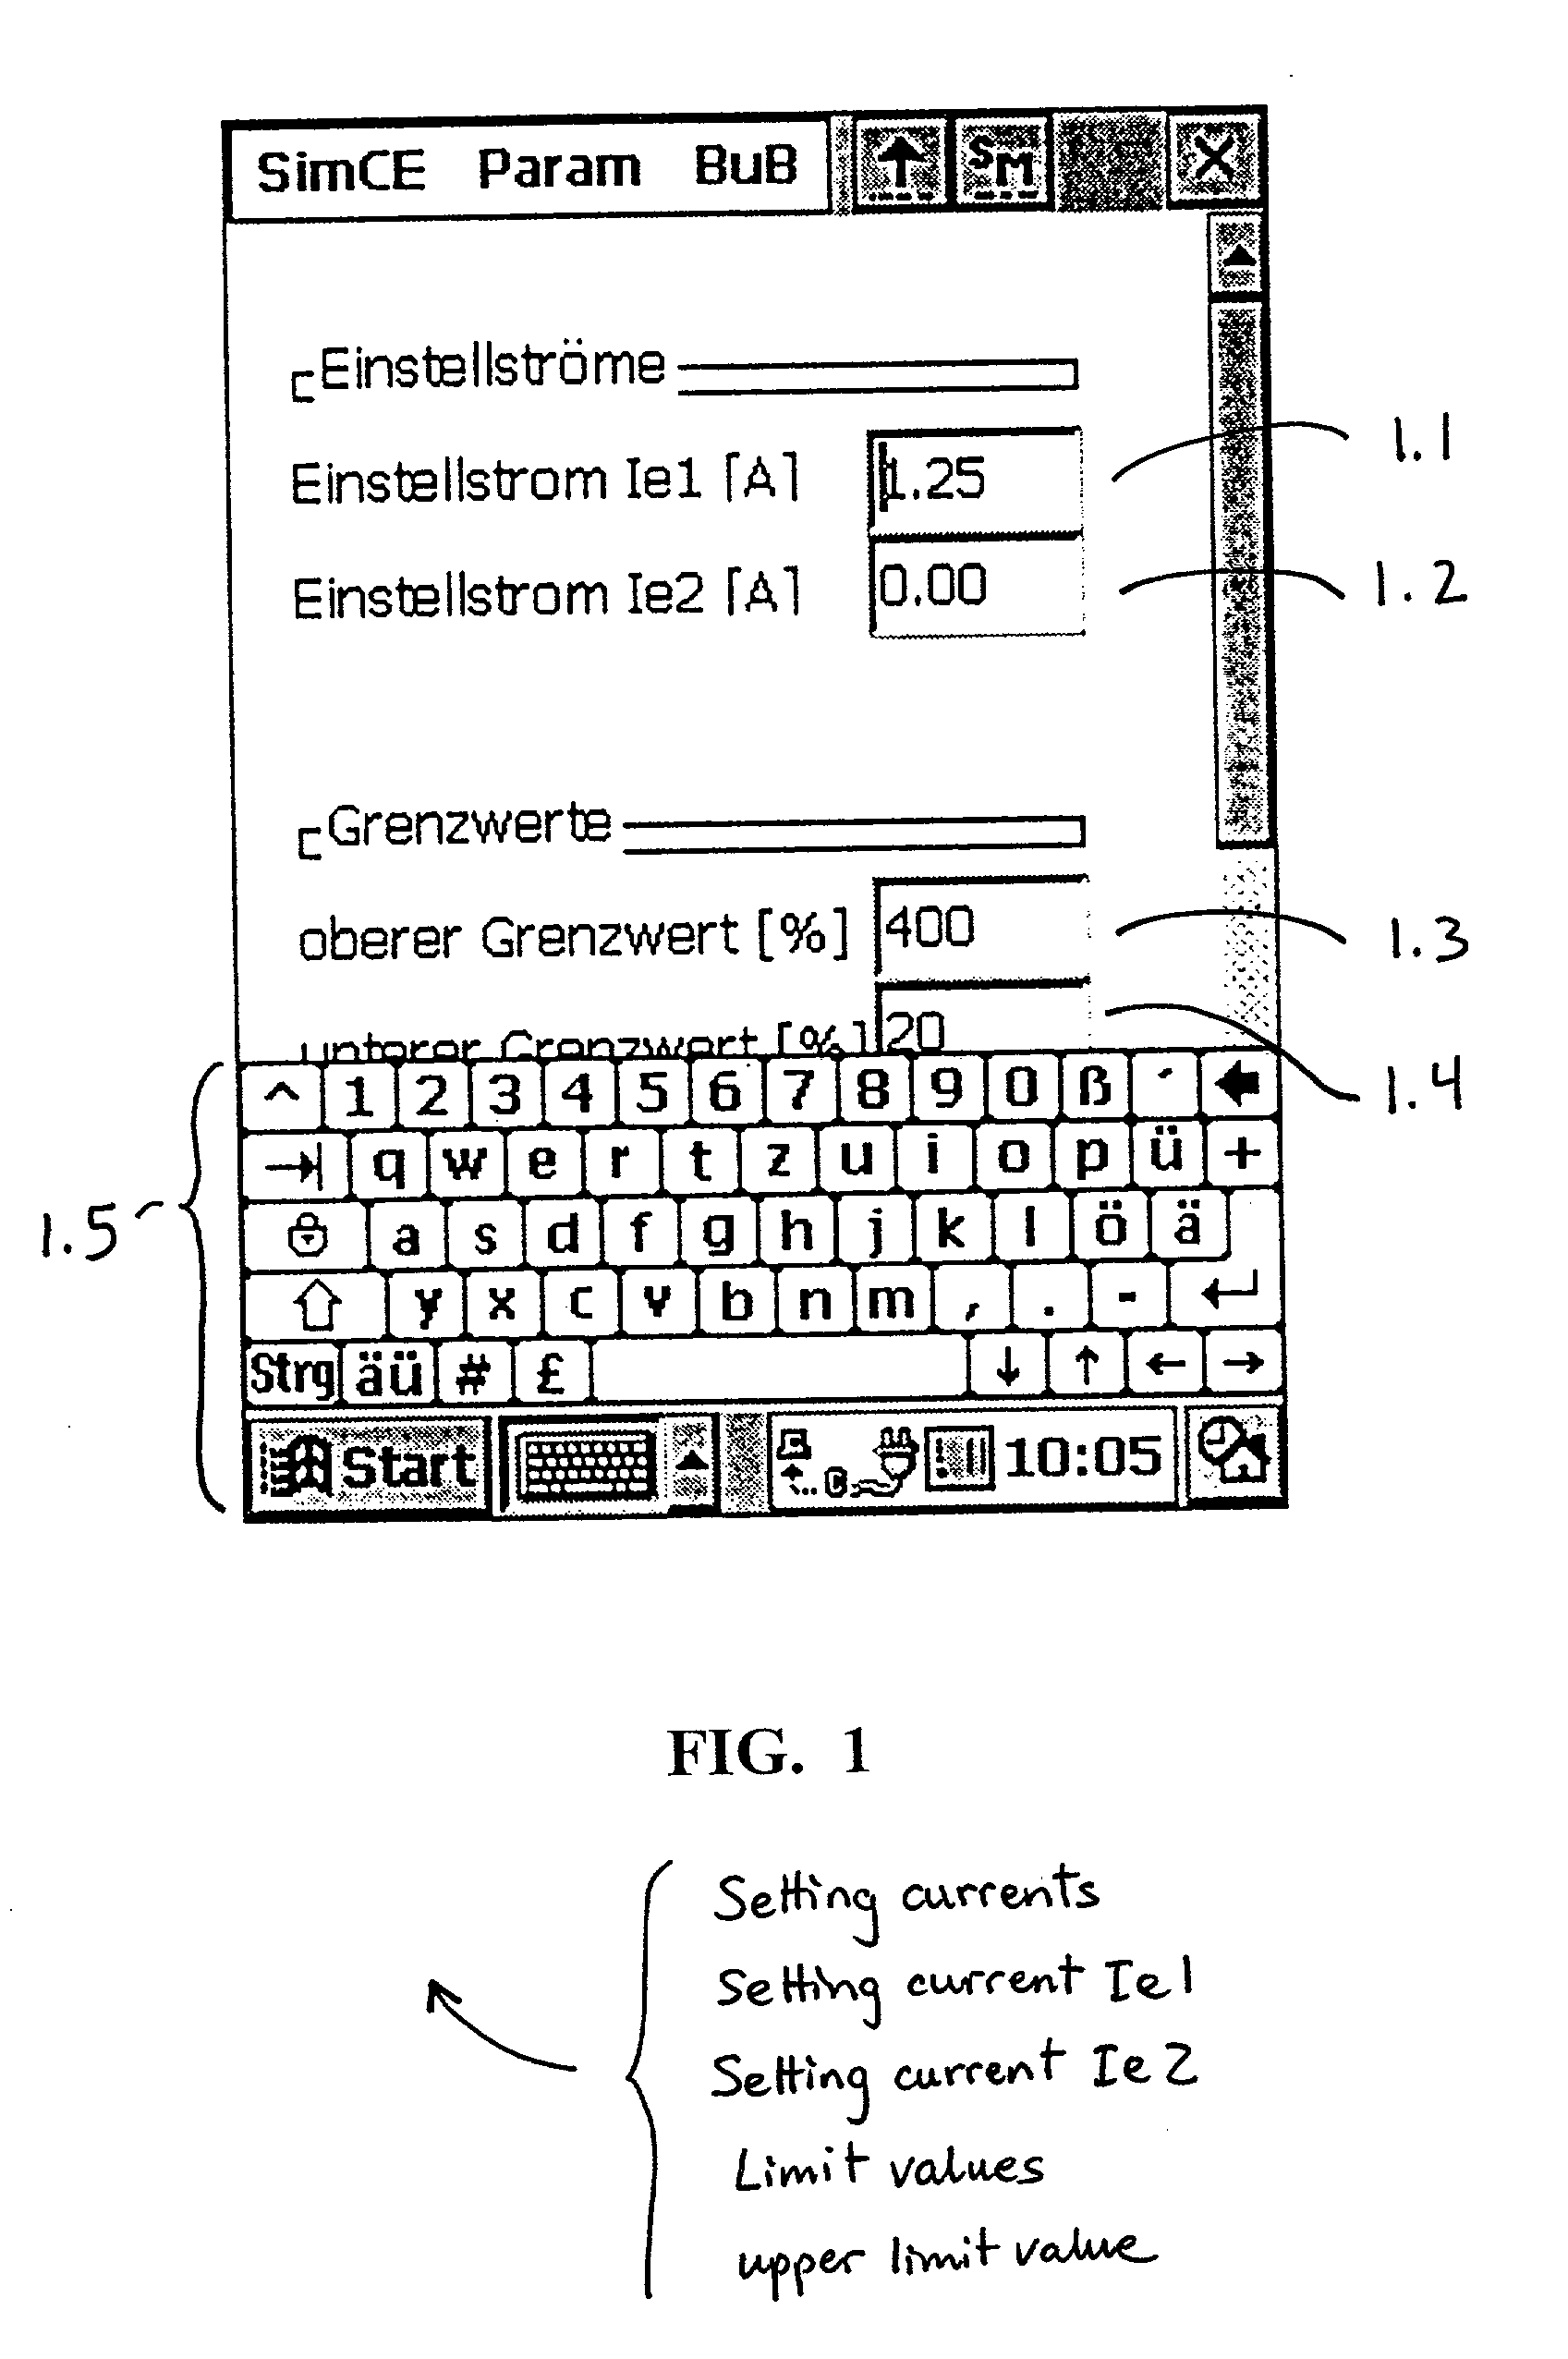 Interactive input with limit-value monitoring and on-line help for a palmtop device